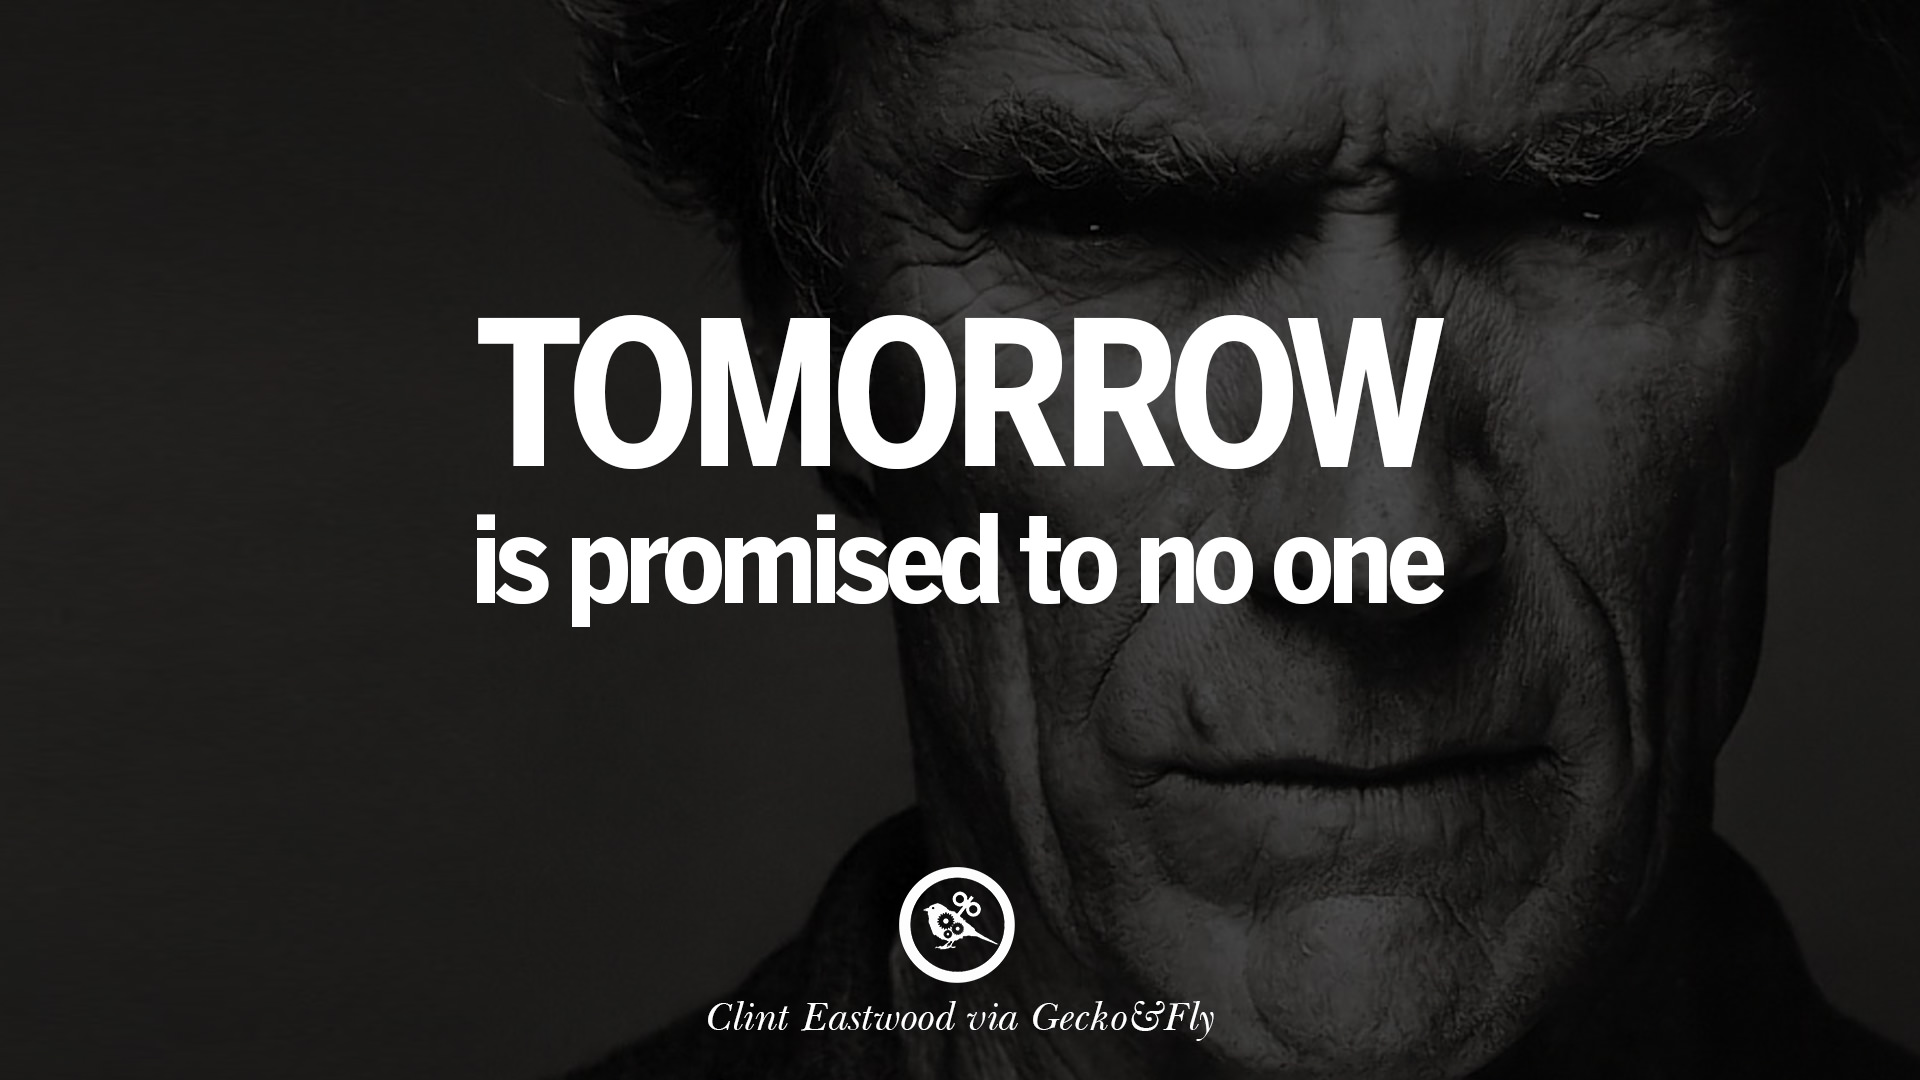 24 Inspiring Clint Eastwood Quotes On Politics, Life And Work